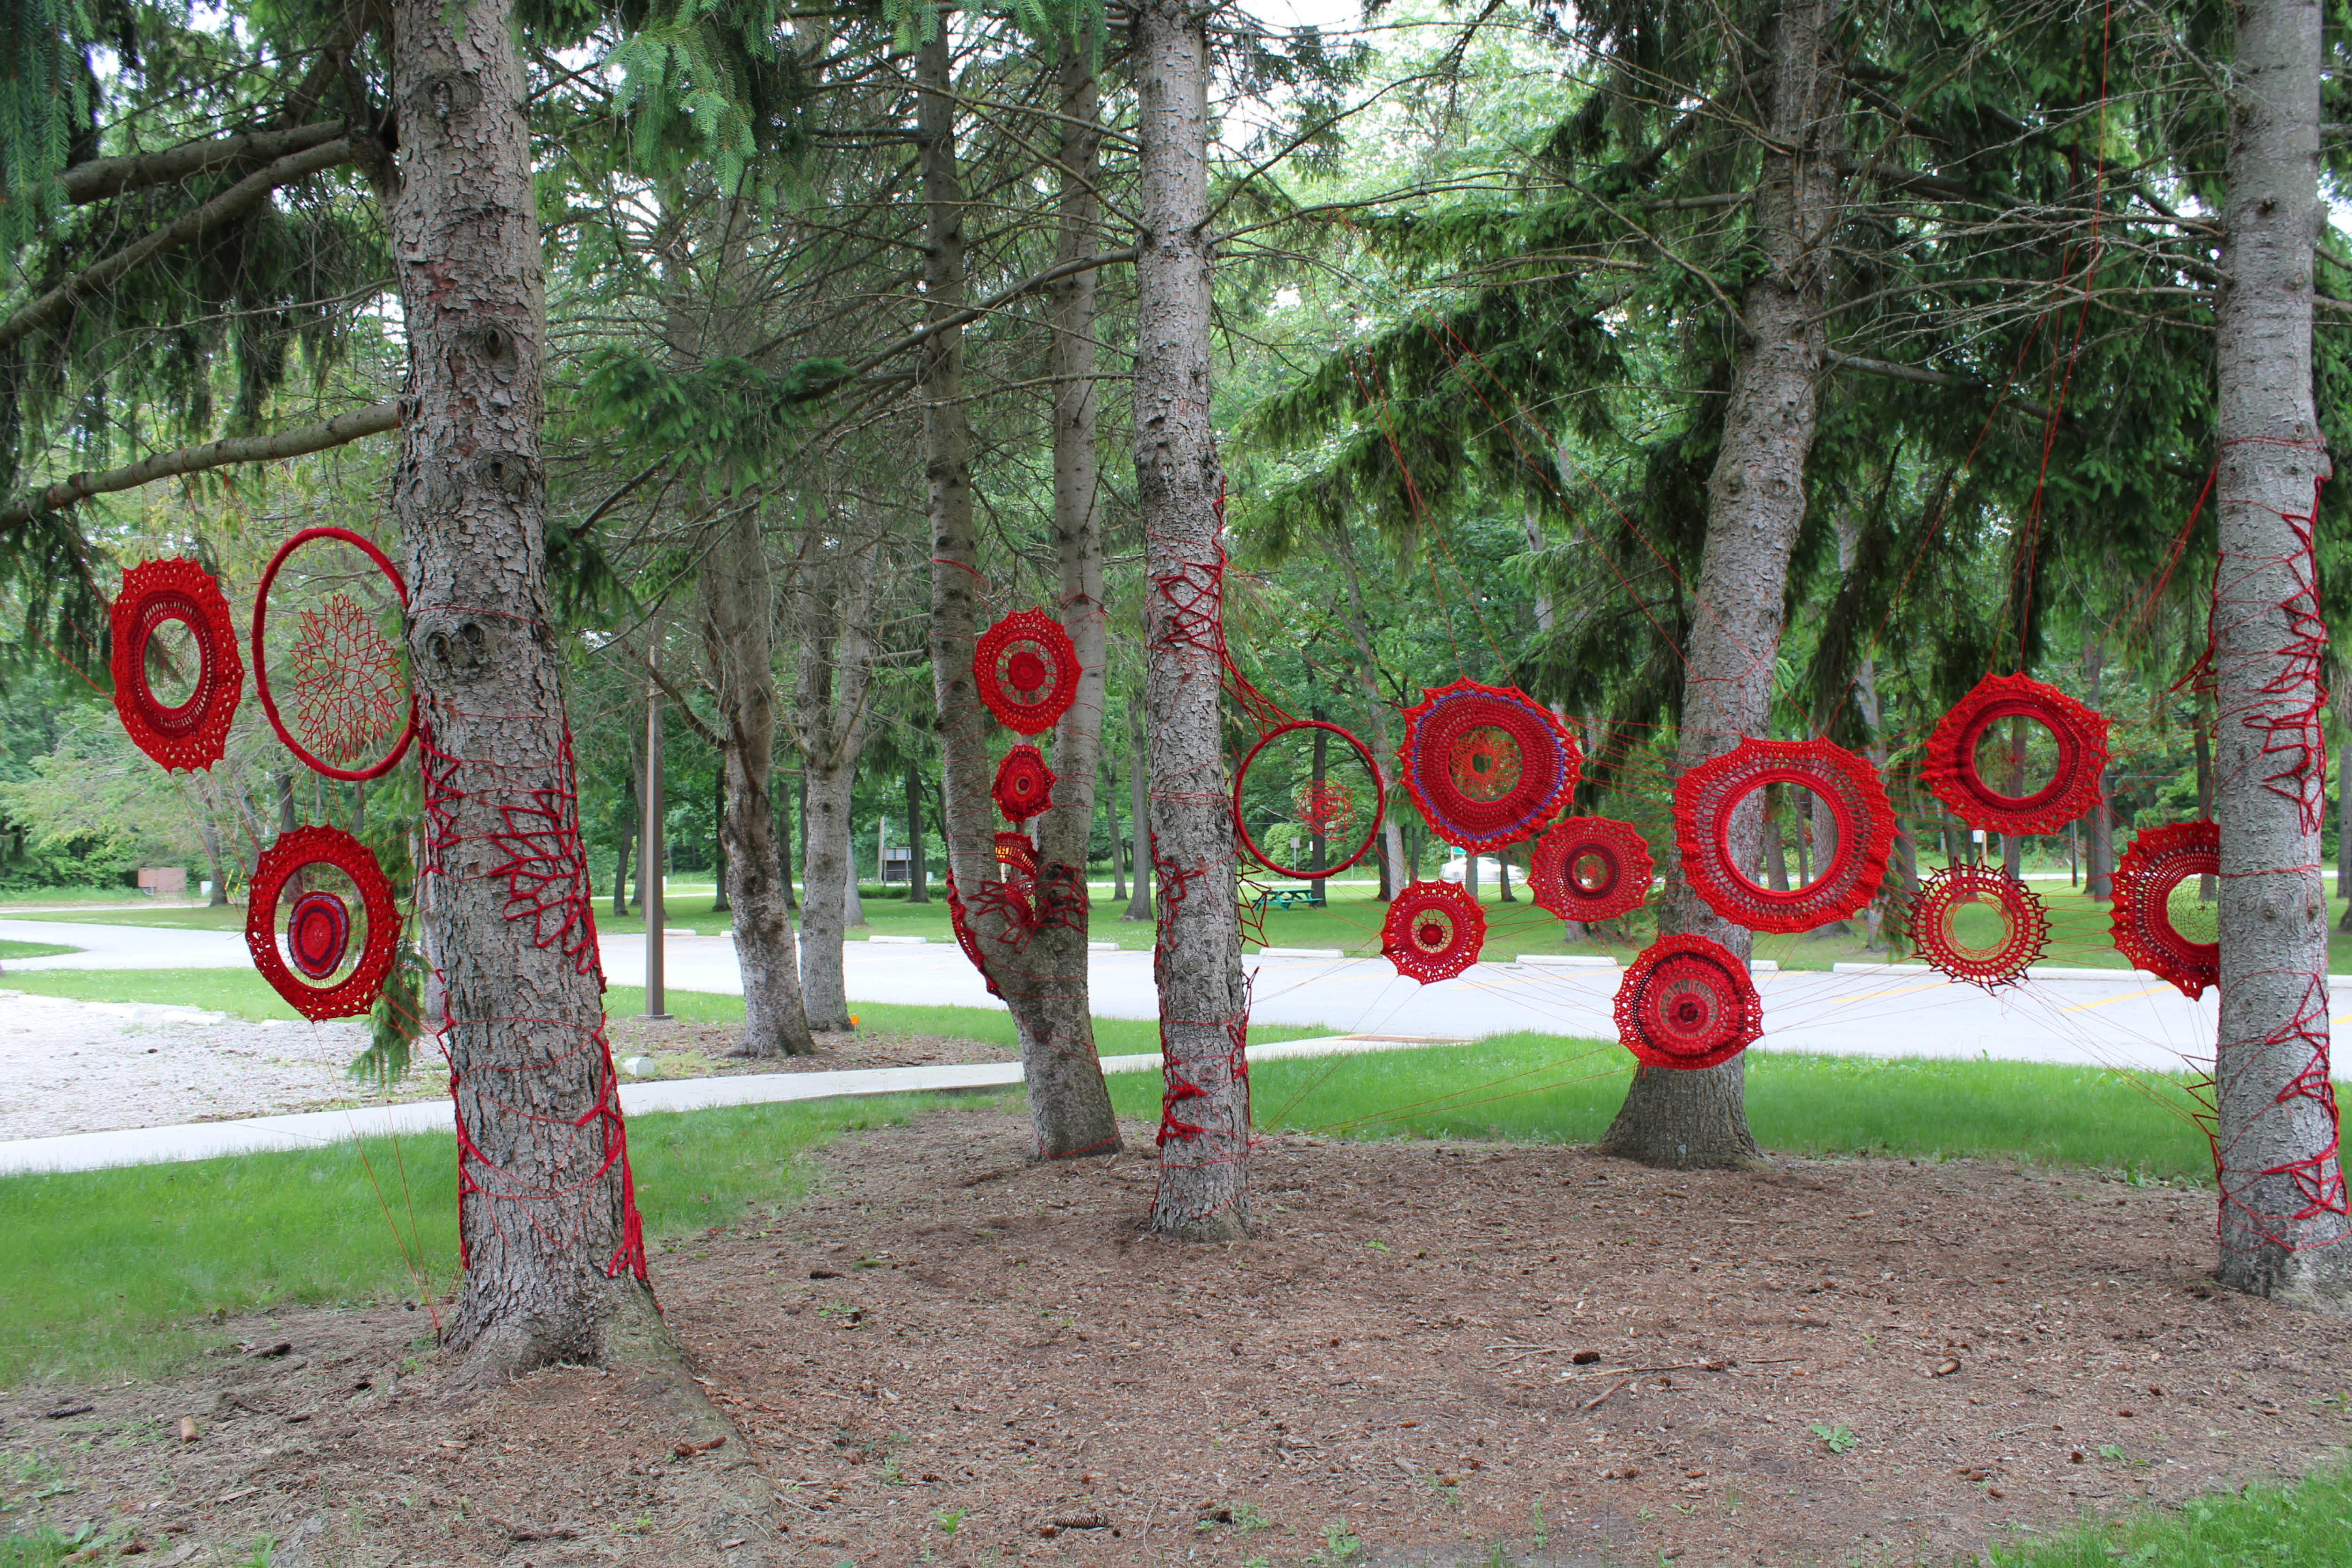 Hope and Healing in Canada installation of red yarn amongst trees on grounds of Lambton Heritage Museum.